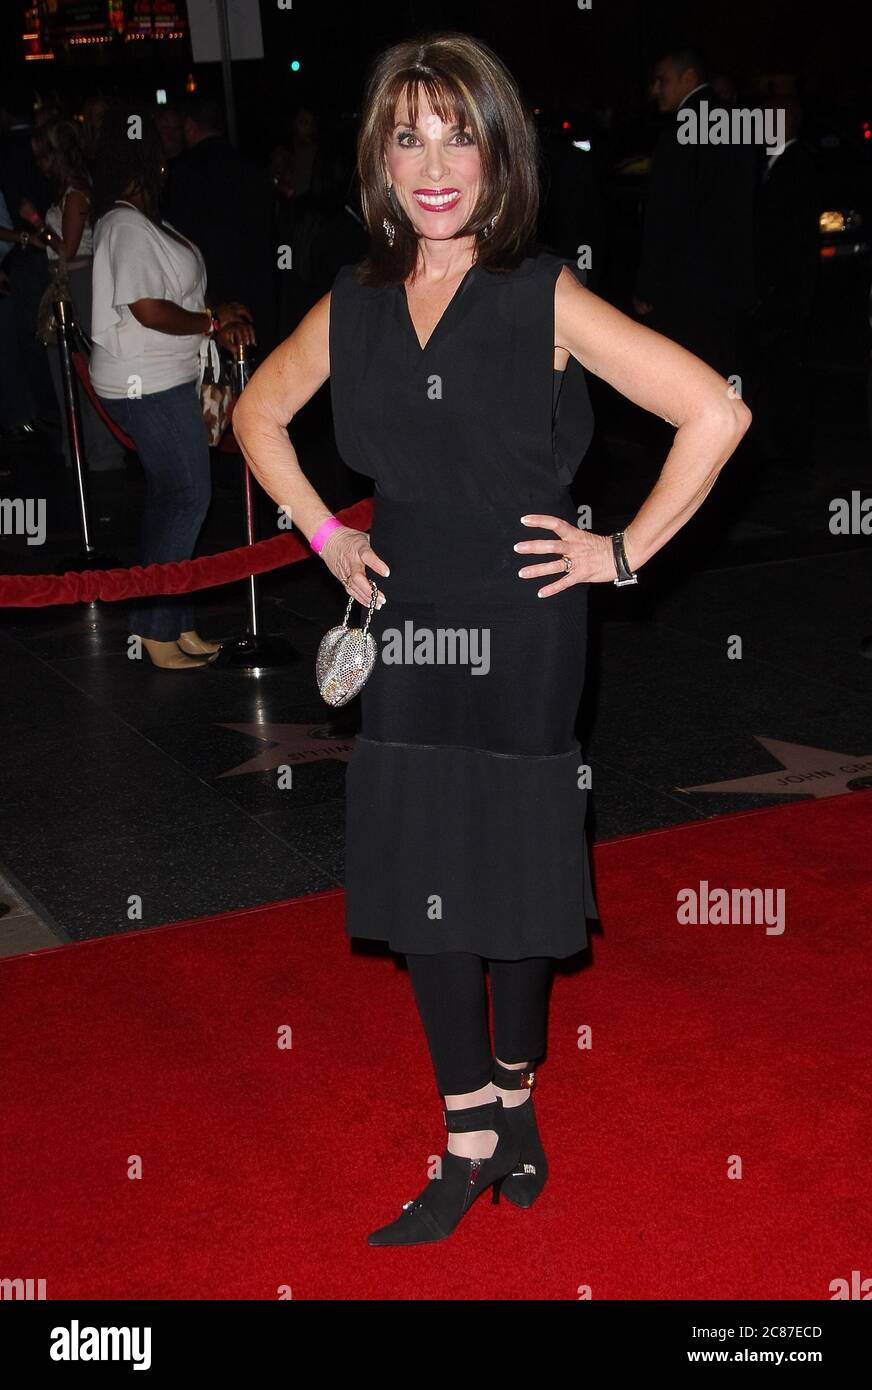 Kate Linder at the Premiere of 'Somebody Help Me' held at the Grauman's Chinese Theater in Hollywood, CA. The event took place on Thursday, October25, 2007. Photo by: SBM / PictureLux- File Reference # 34006-9472SBMPLX Stock Photo